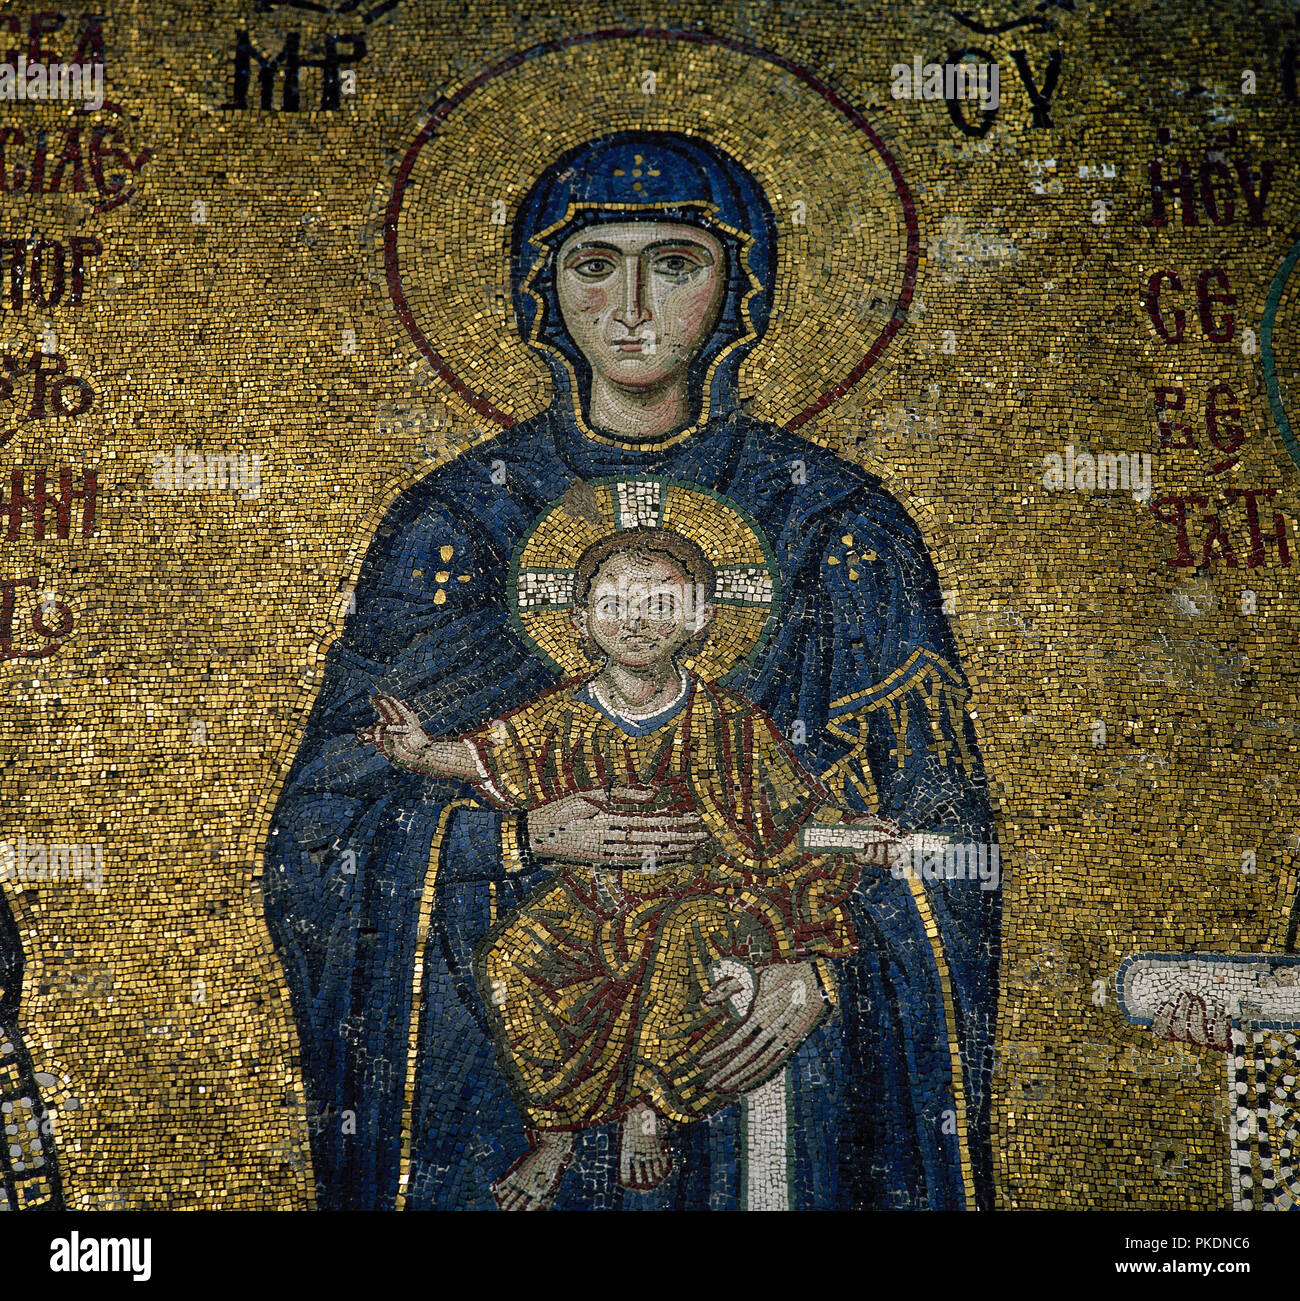 Turkey. Istambul. Hagia Sofia. Byzantine mosaic. Virgin Mother holding the Christ Child. Ca, 1118. 12th century. Detail of the mosaic with emperor John II Comnemus, Virgin Mary with the Child Jesus and the empress Irene. Southern gallery. Stock Photo